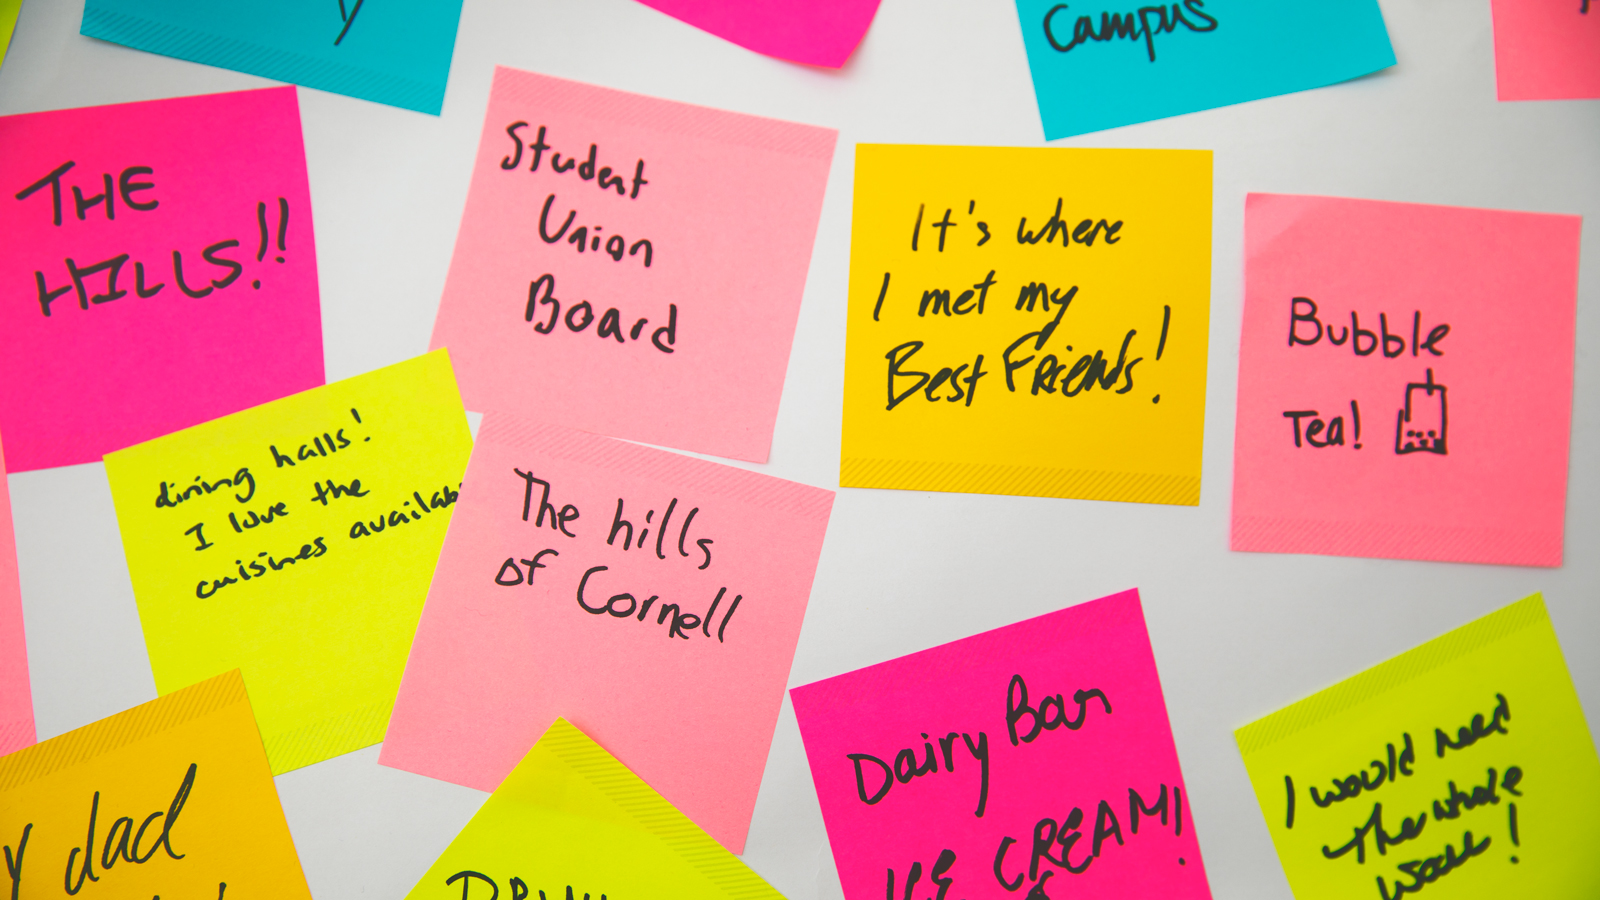 Image of multiple Post-It notes, some of which say: the hills!!; Student Union board; it's where I met my best friends!; bubble tea; dining halls! I love the cuisines available; the hills of Cornell; Dairy Bar ice cream; and I would need the whole wall!